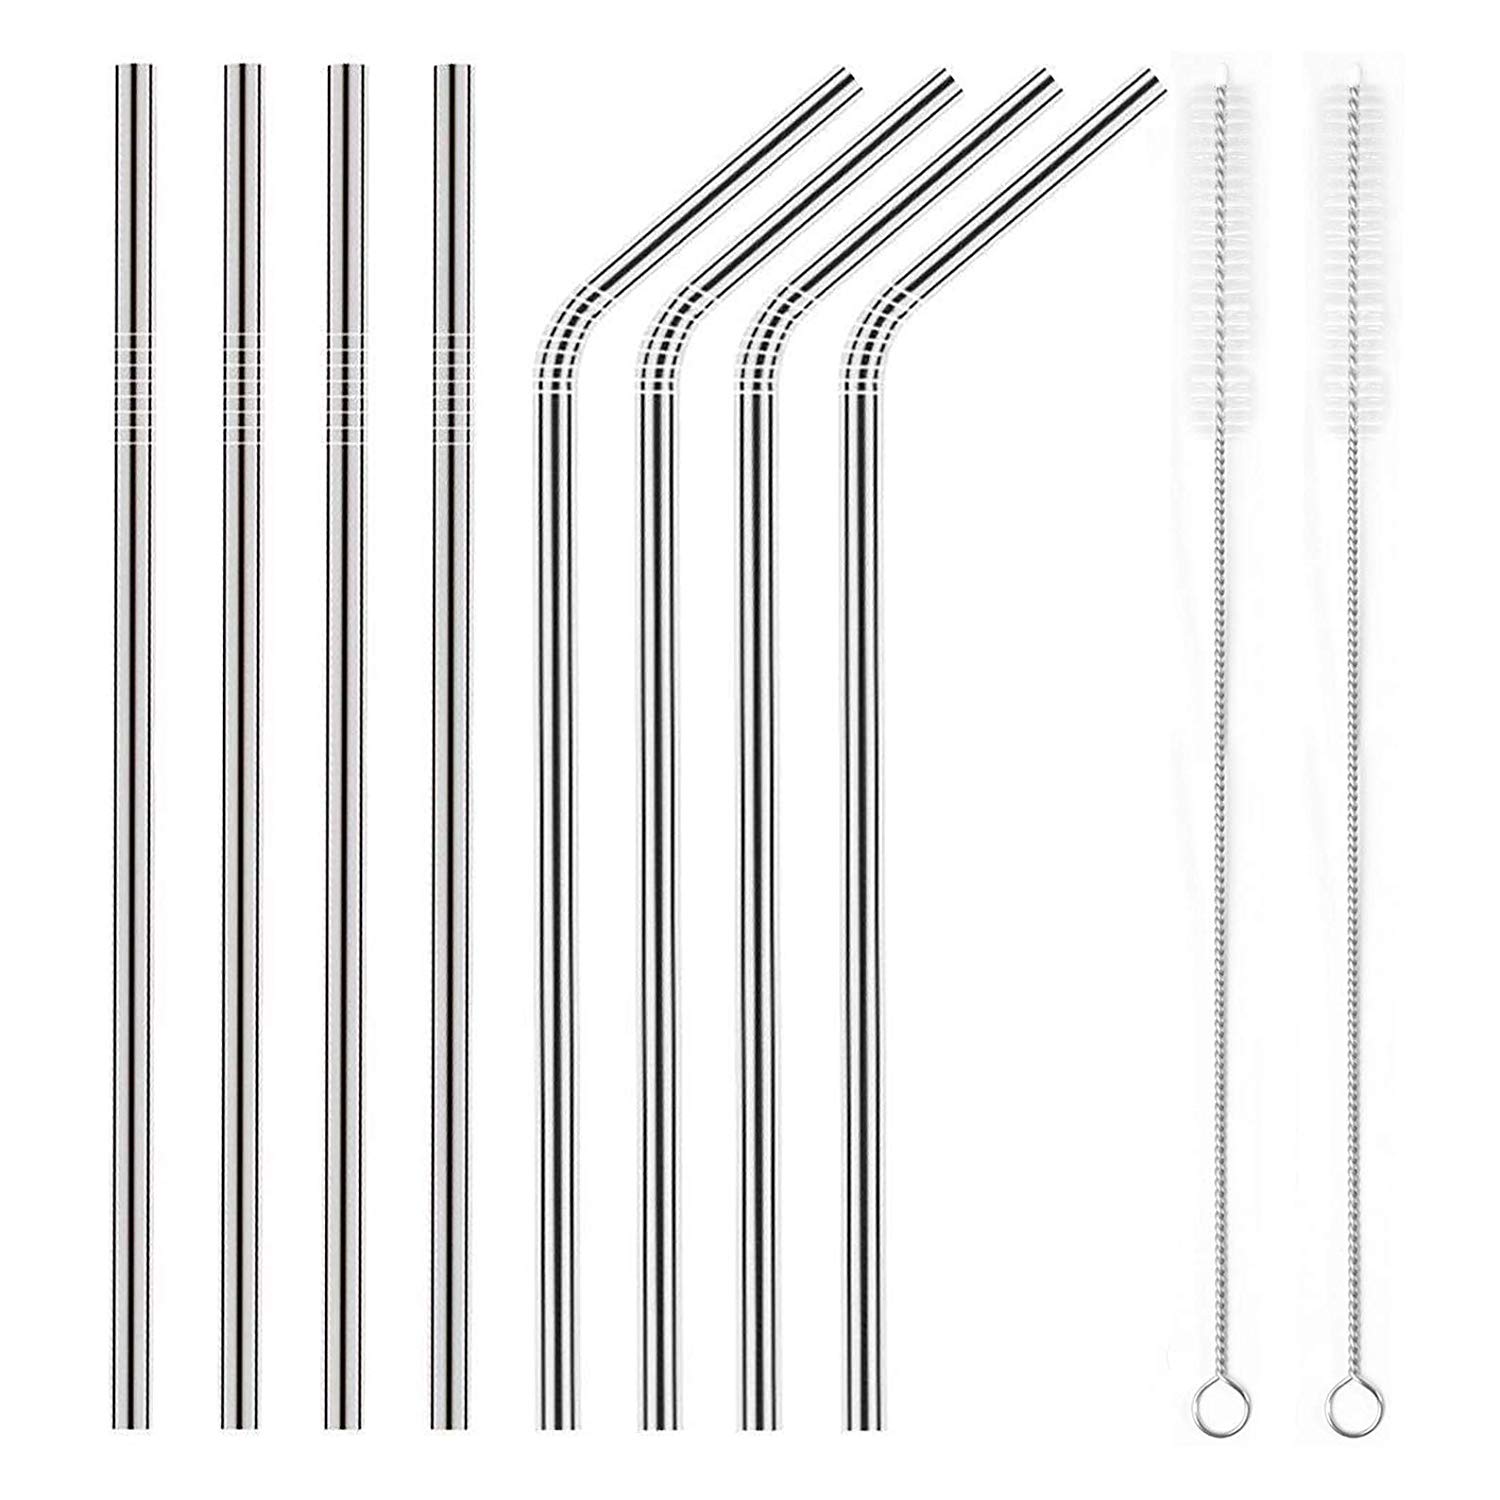 Metal straws: A simple, affordable way to cut back your plastic consumption 